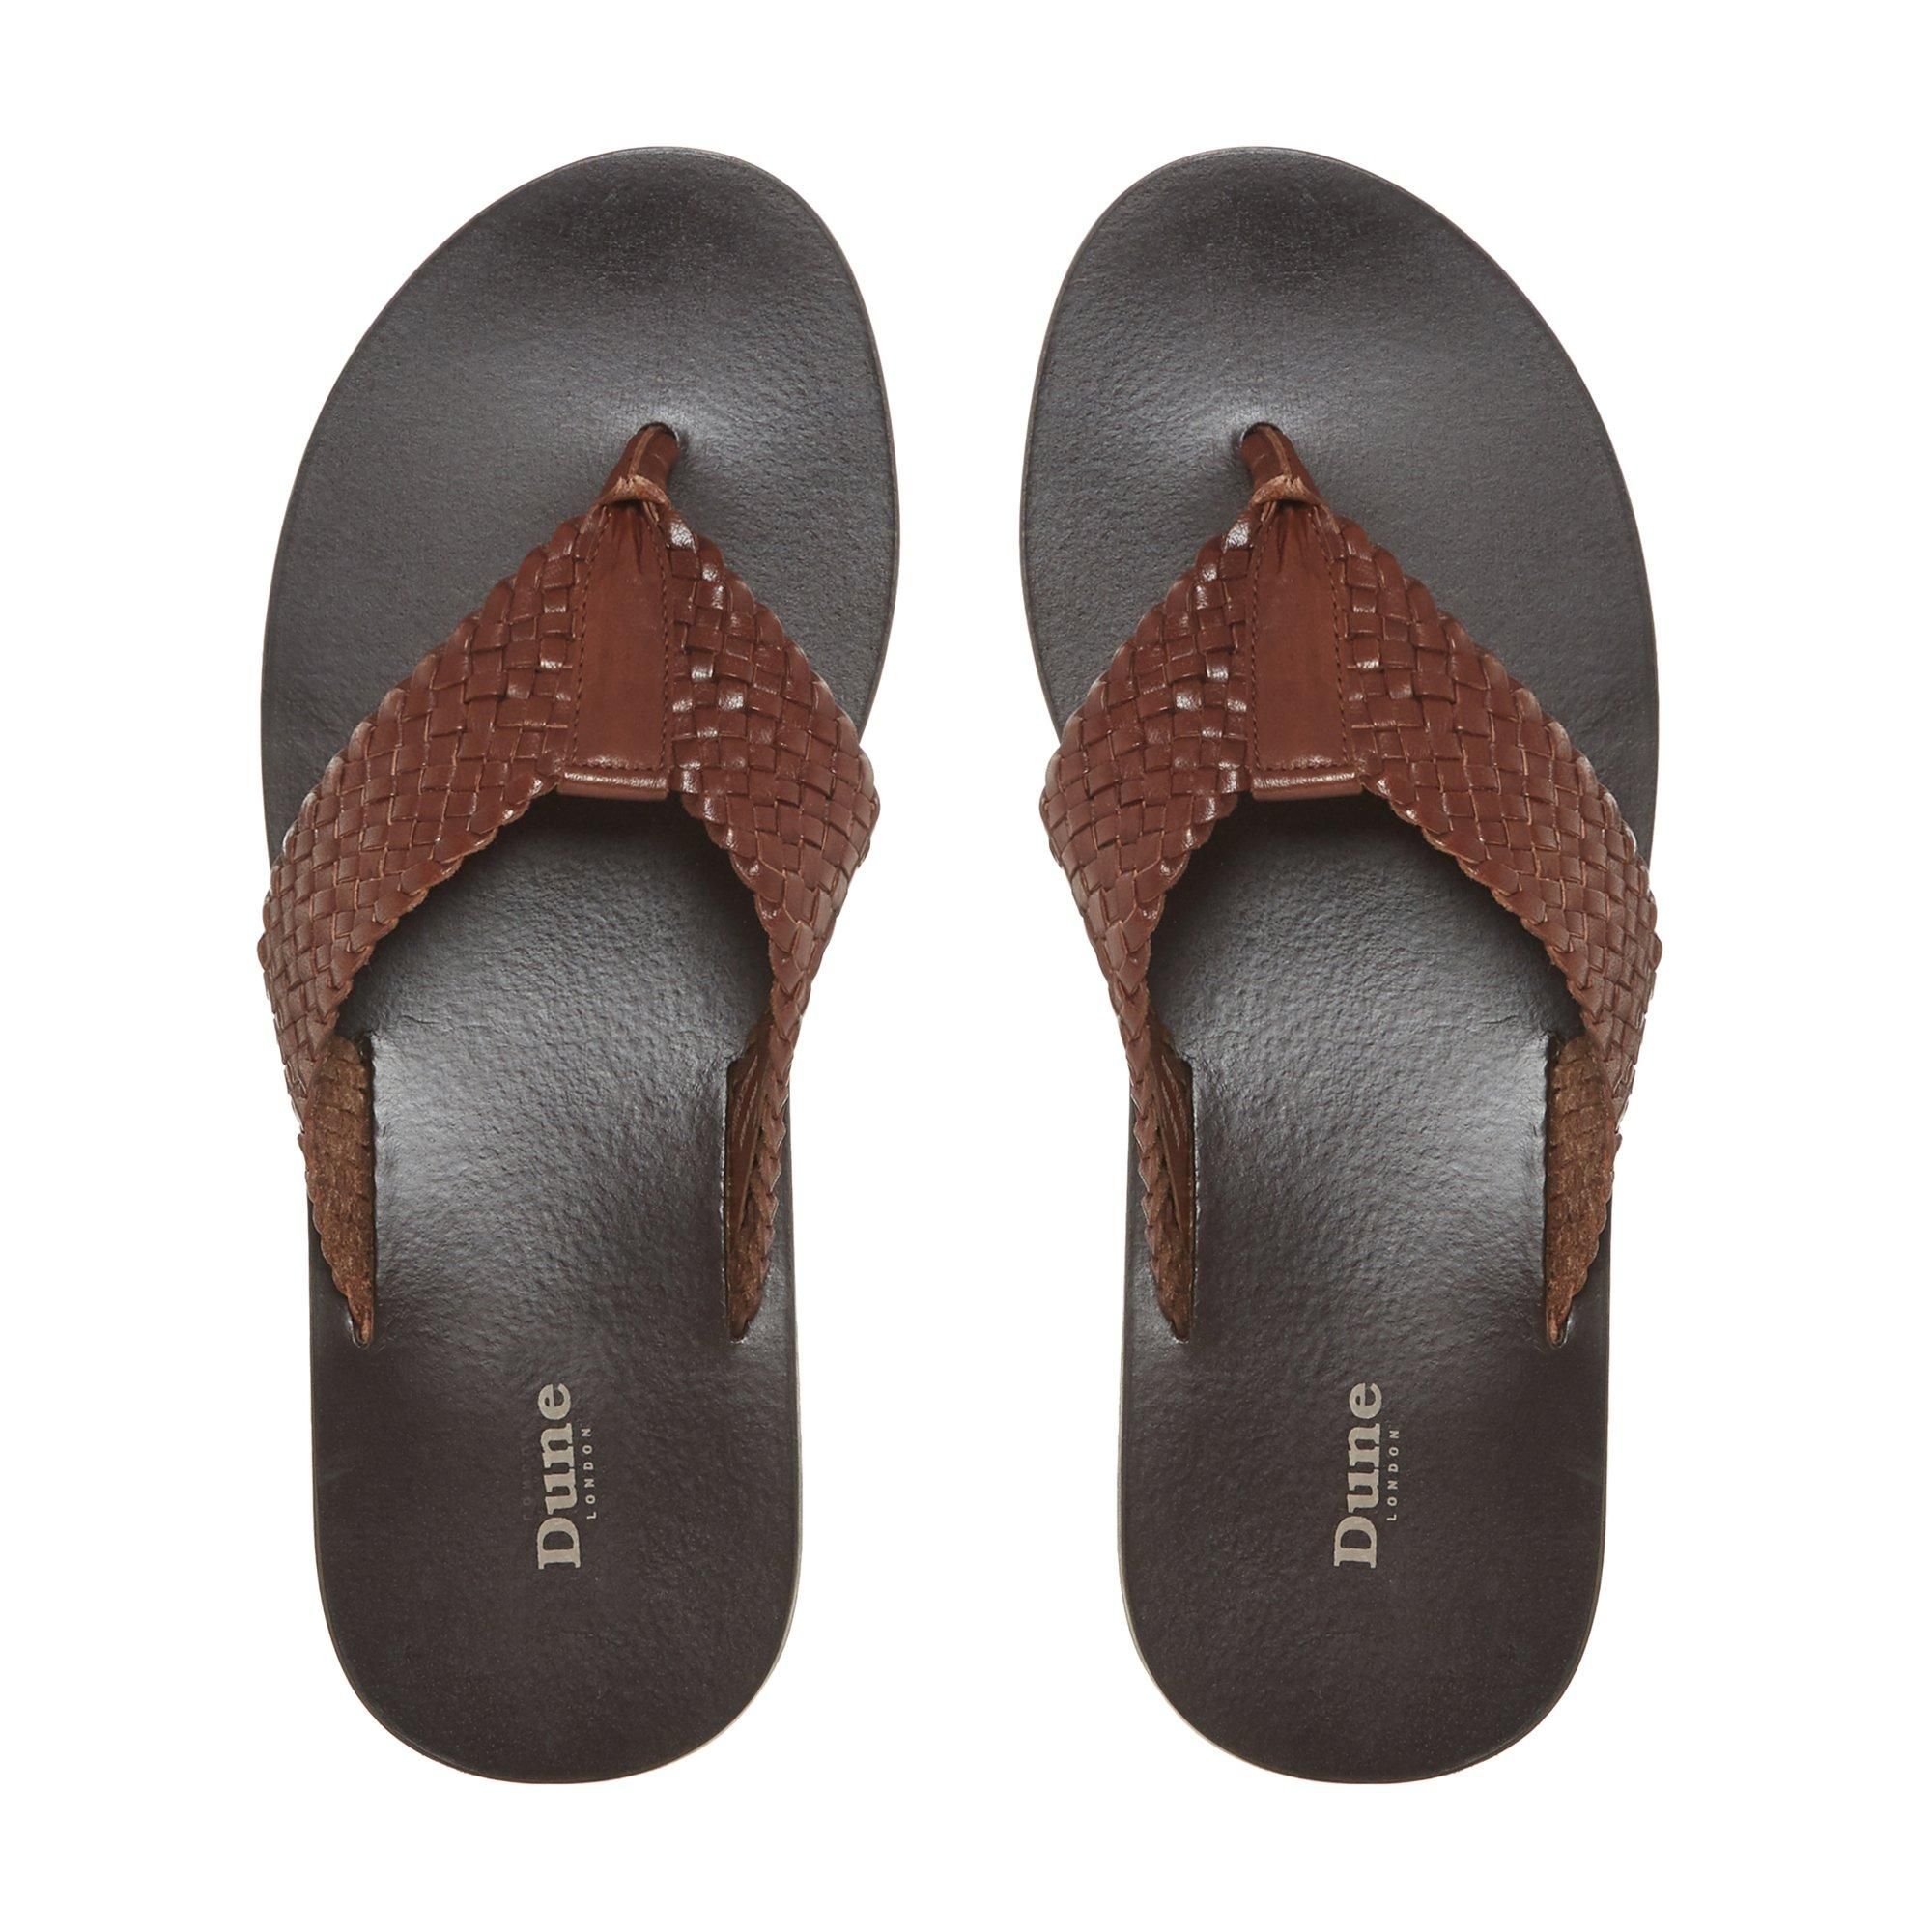 Prepare for warm weather with these woven sandals from Dune London. Made from leather, the woven toe-post straps offer textured interest. Its soft footbed offers enduring comfort while you're out and about.